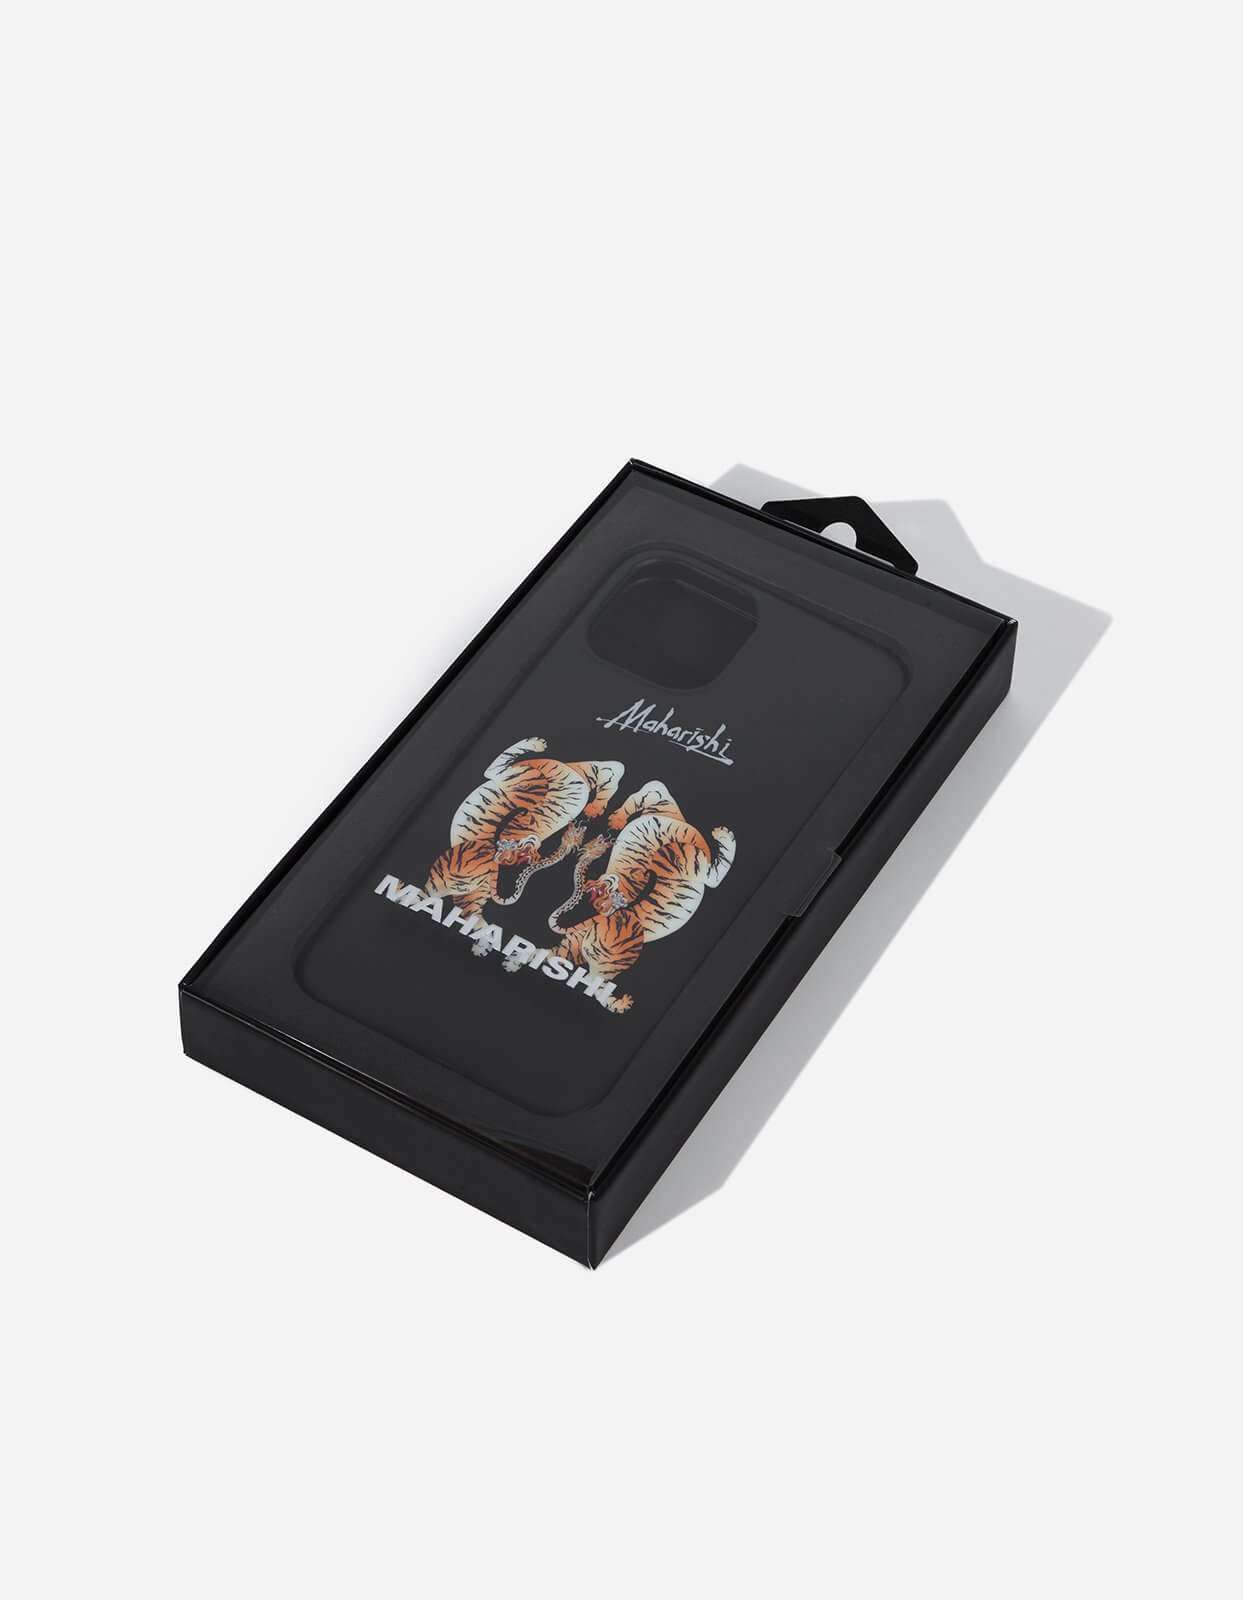 ss21_9383-in-mold-iphone-12-12-pro-case-heart-of-tigers_black_40